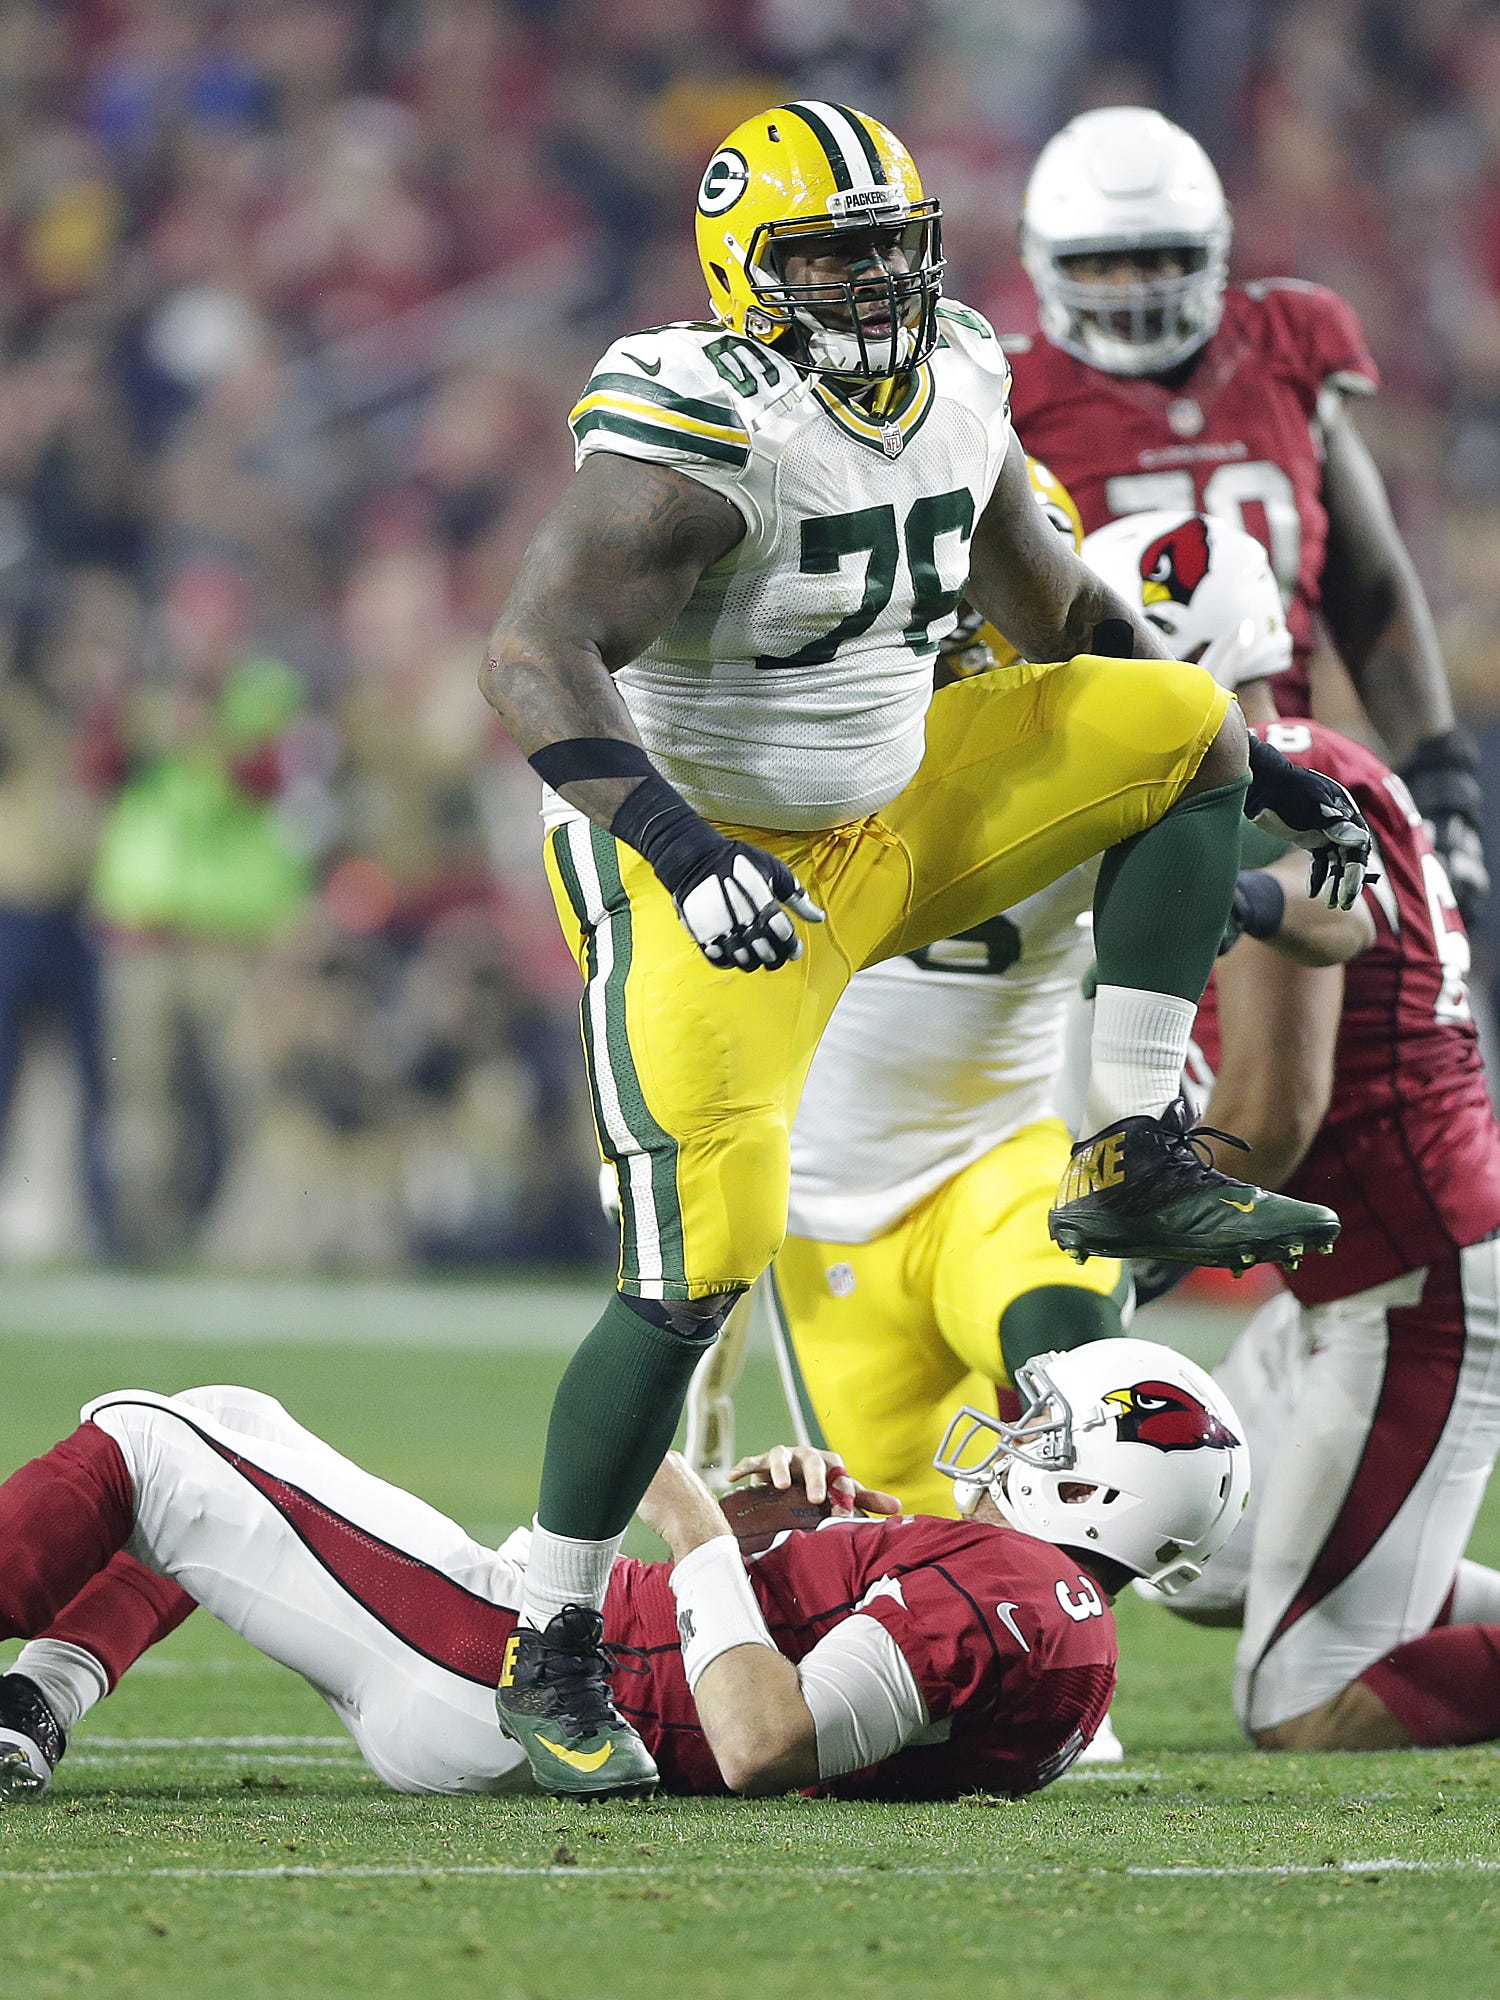 Green Bay Packers defensive tackle Mike Daniels (76) reacts after sacking Arizona Cardinals quarterback Carson Palmer (3) in the second quarter of an NFC divisional playoff game on Jan. 16, 2016, at University of Phoenix Stadium in Glendale, Ariz.